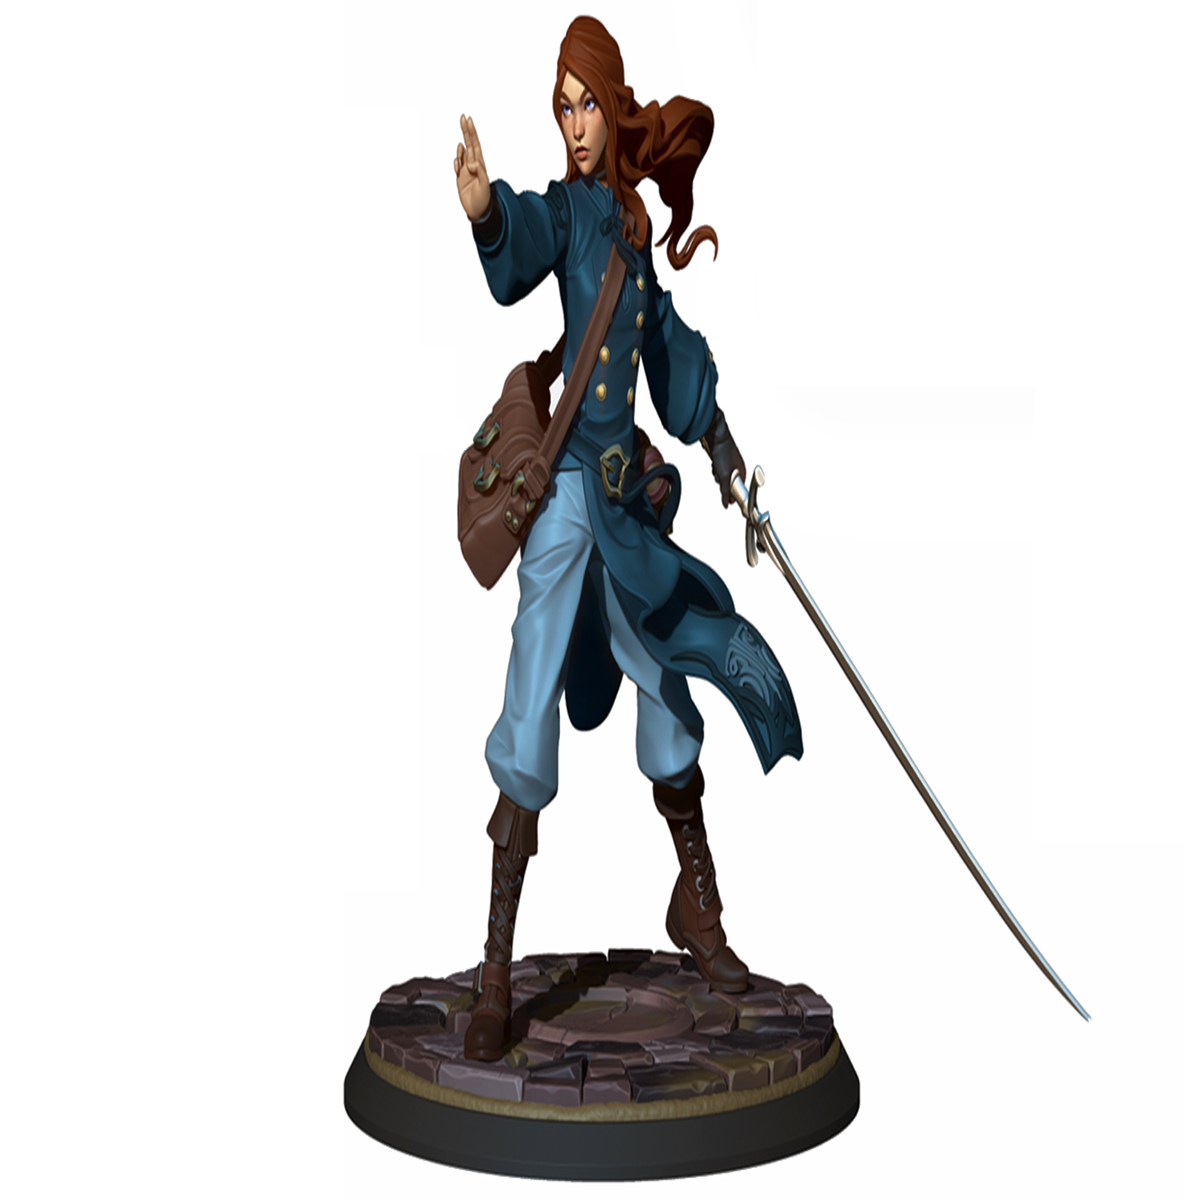 The Stormlight Archive Premium Miniatures — Brotherwise Games